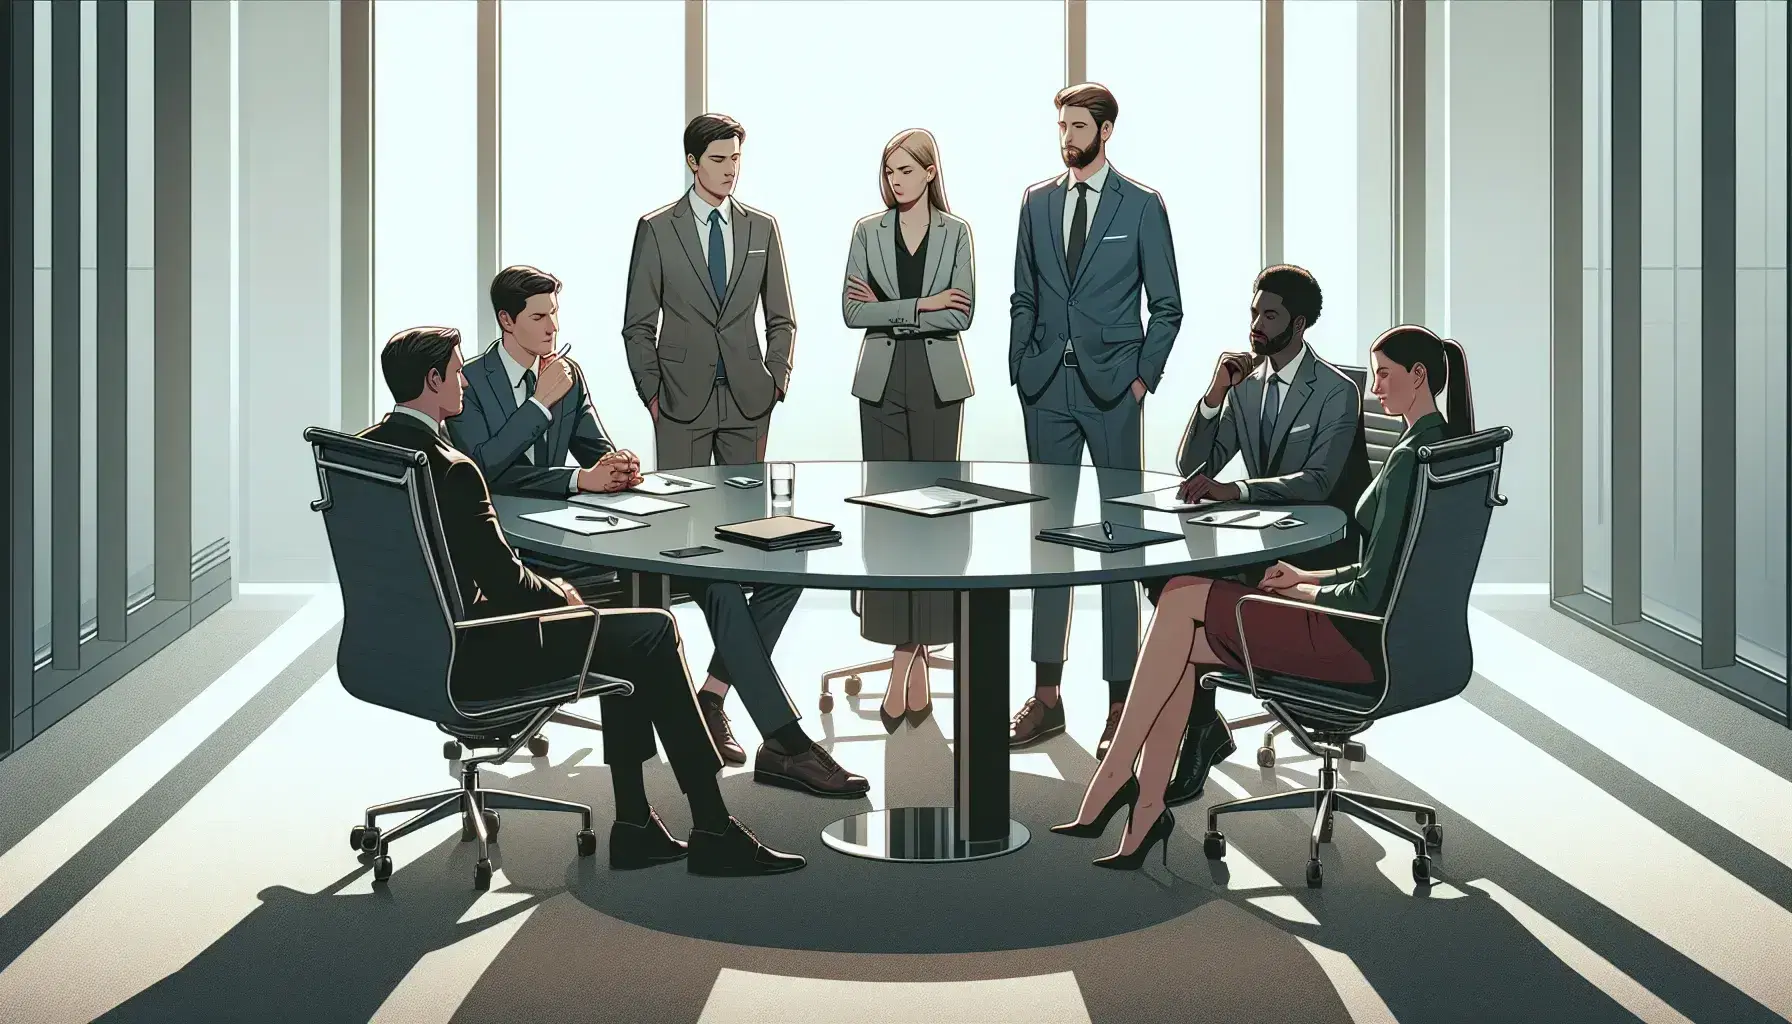 Professional office environment with six workers around reflective round table, elegant clothes, closed folders and pens on the table, soft lighting.